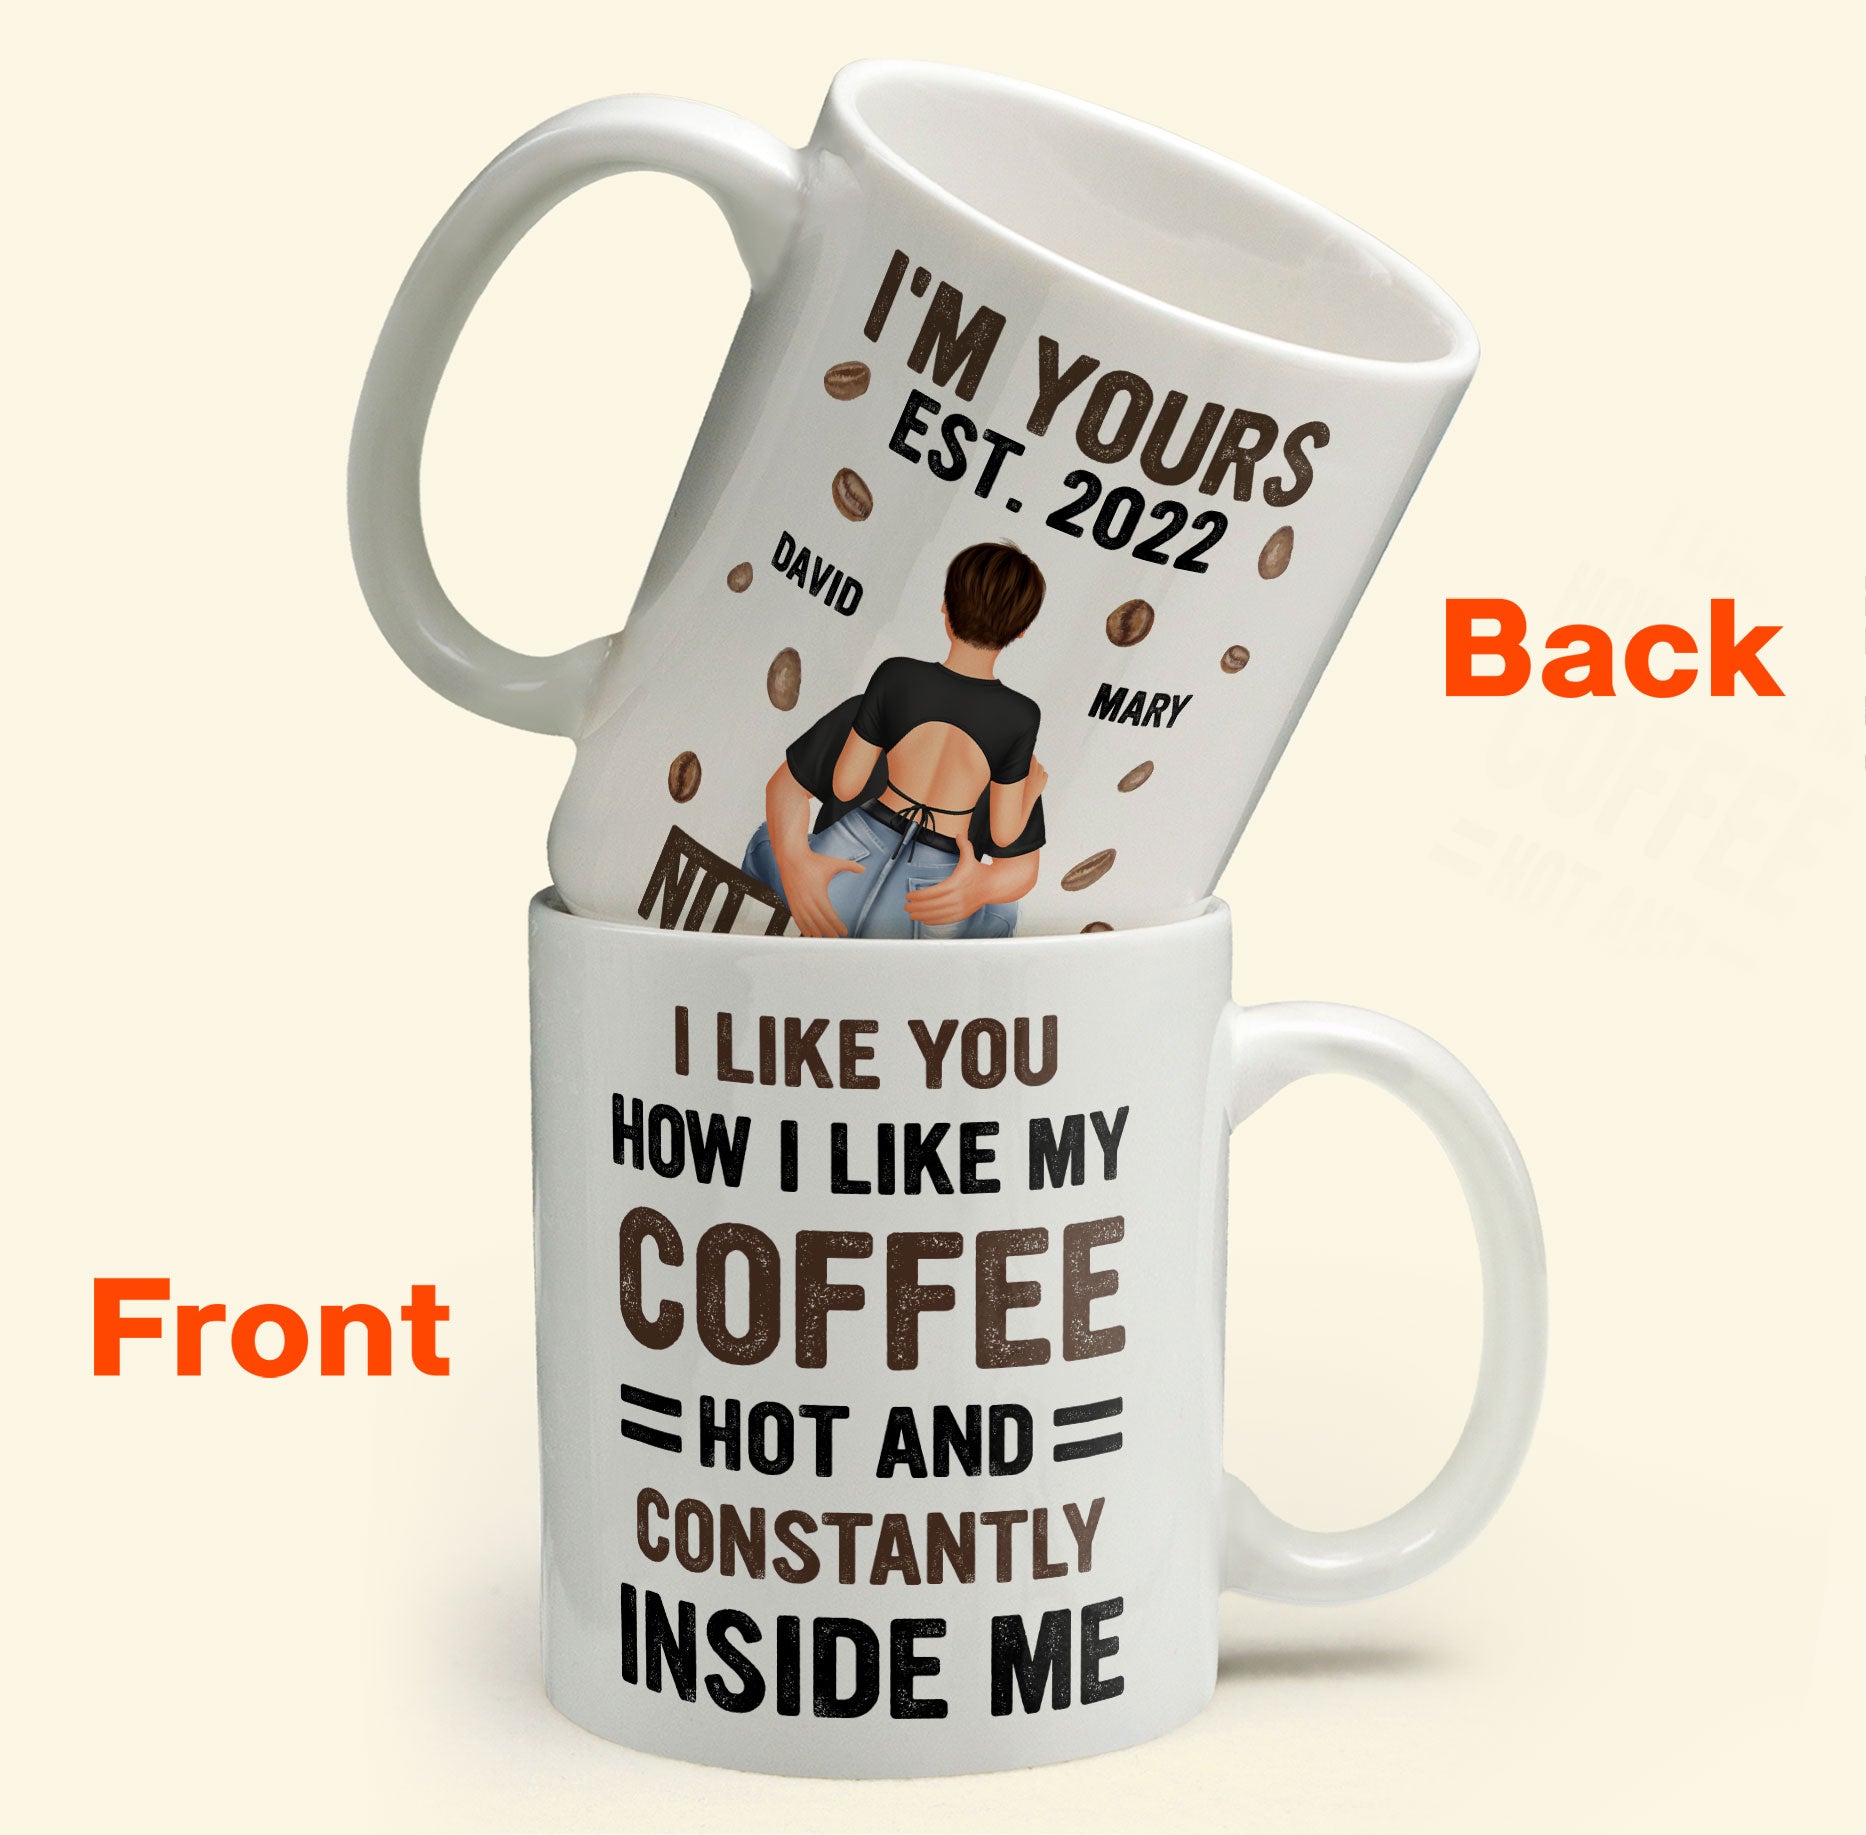 I Like You How I Like My Coffee, Hot And Inside Me - Personalized Tumbler  Cup